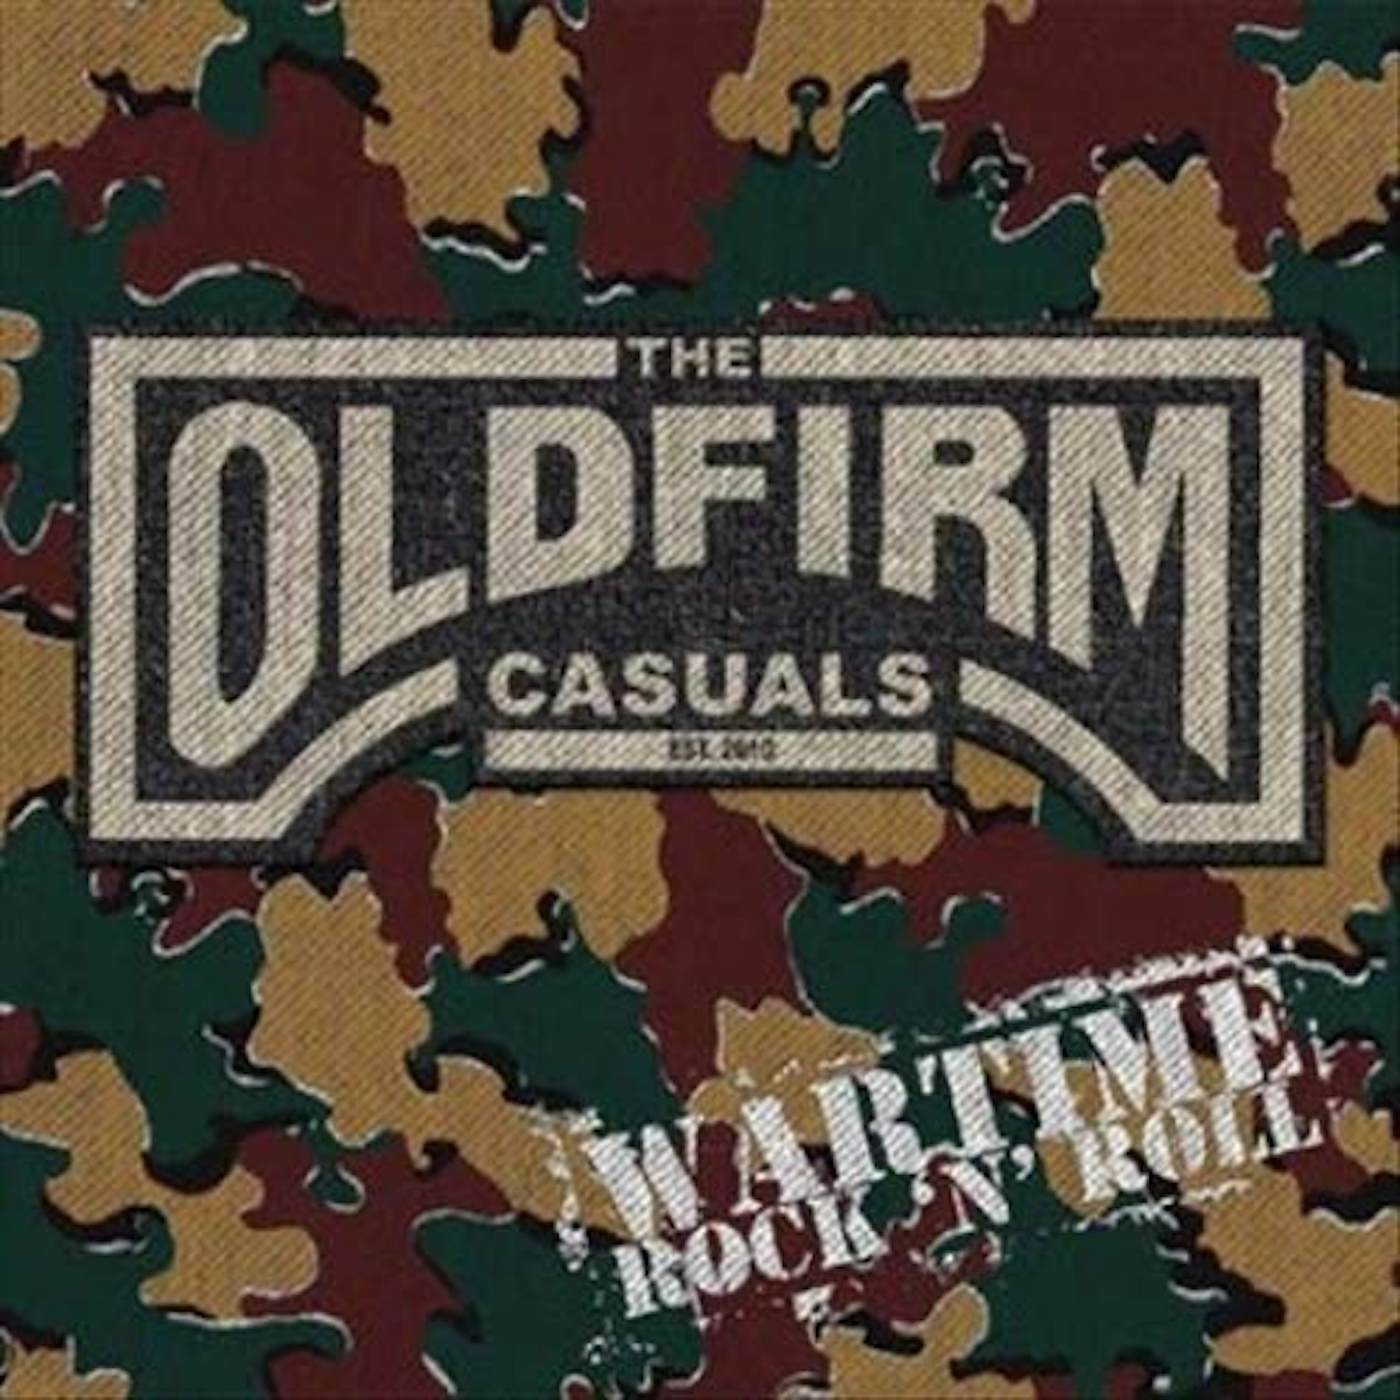 The Old Firm Casuals Wartime Rock 'n' roll Vinyl Record